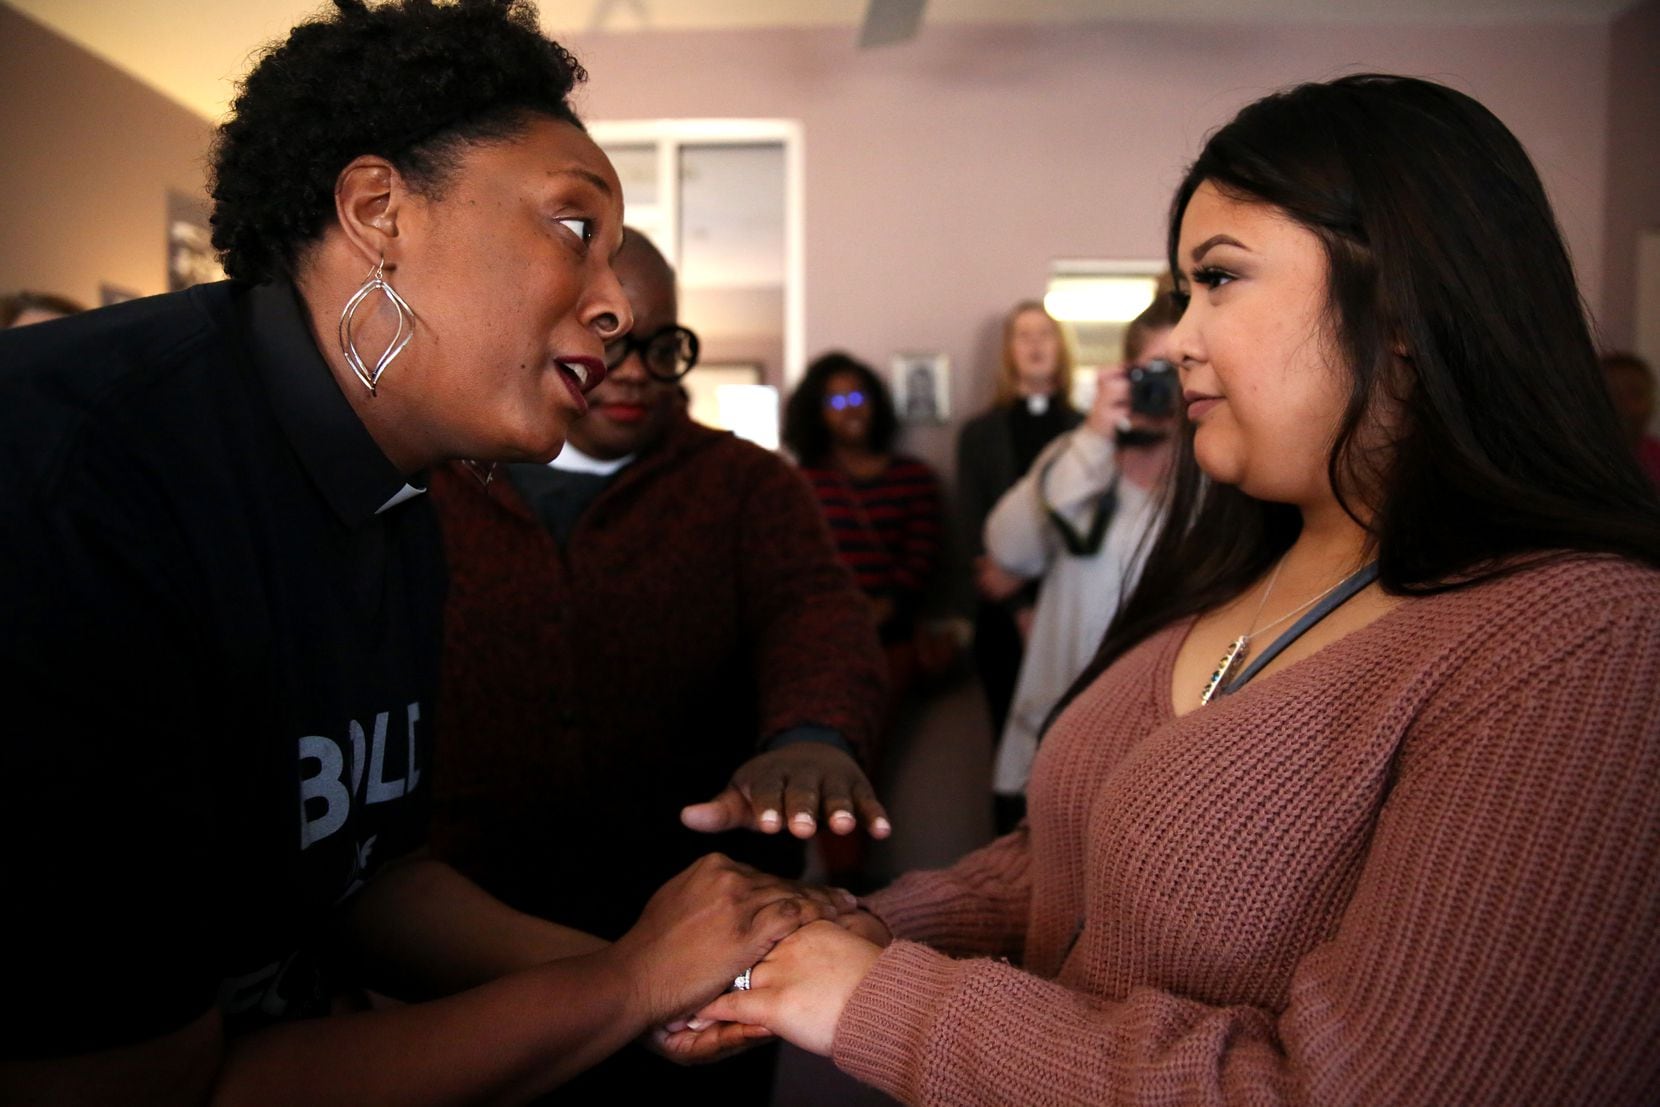 Kentina Washington-Leapheart (left), director of programs for reproductive justice and sexuality education at the Religious Institute, gives an oil blessing to Tiffany Romero, a medical assistant, during a ceremony at the Whole Woman's Health clinic in Fort Worth, Texas on Thursday, Nov. 9, 2017. (Rose Baca/The Dallas Morning News)